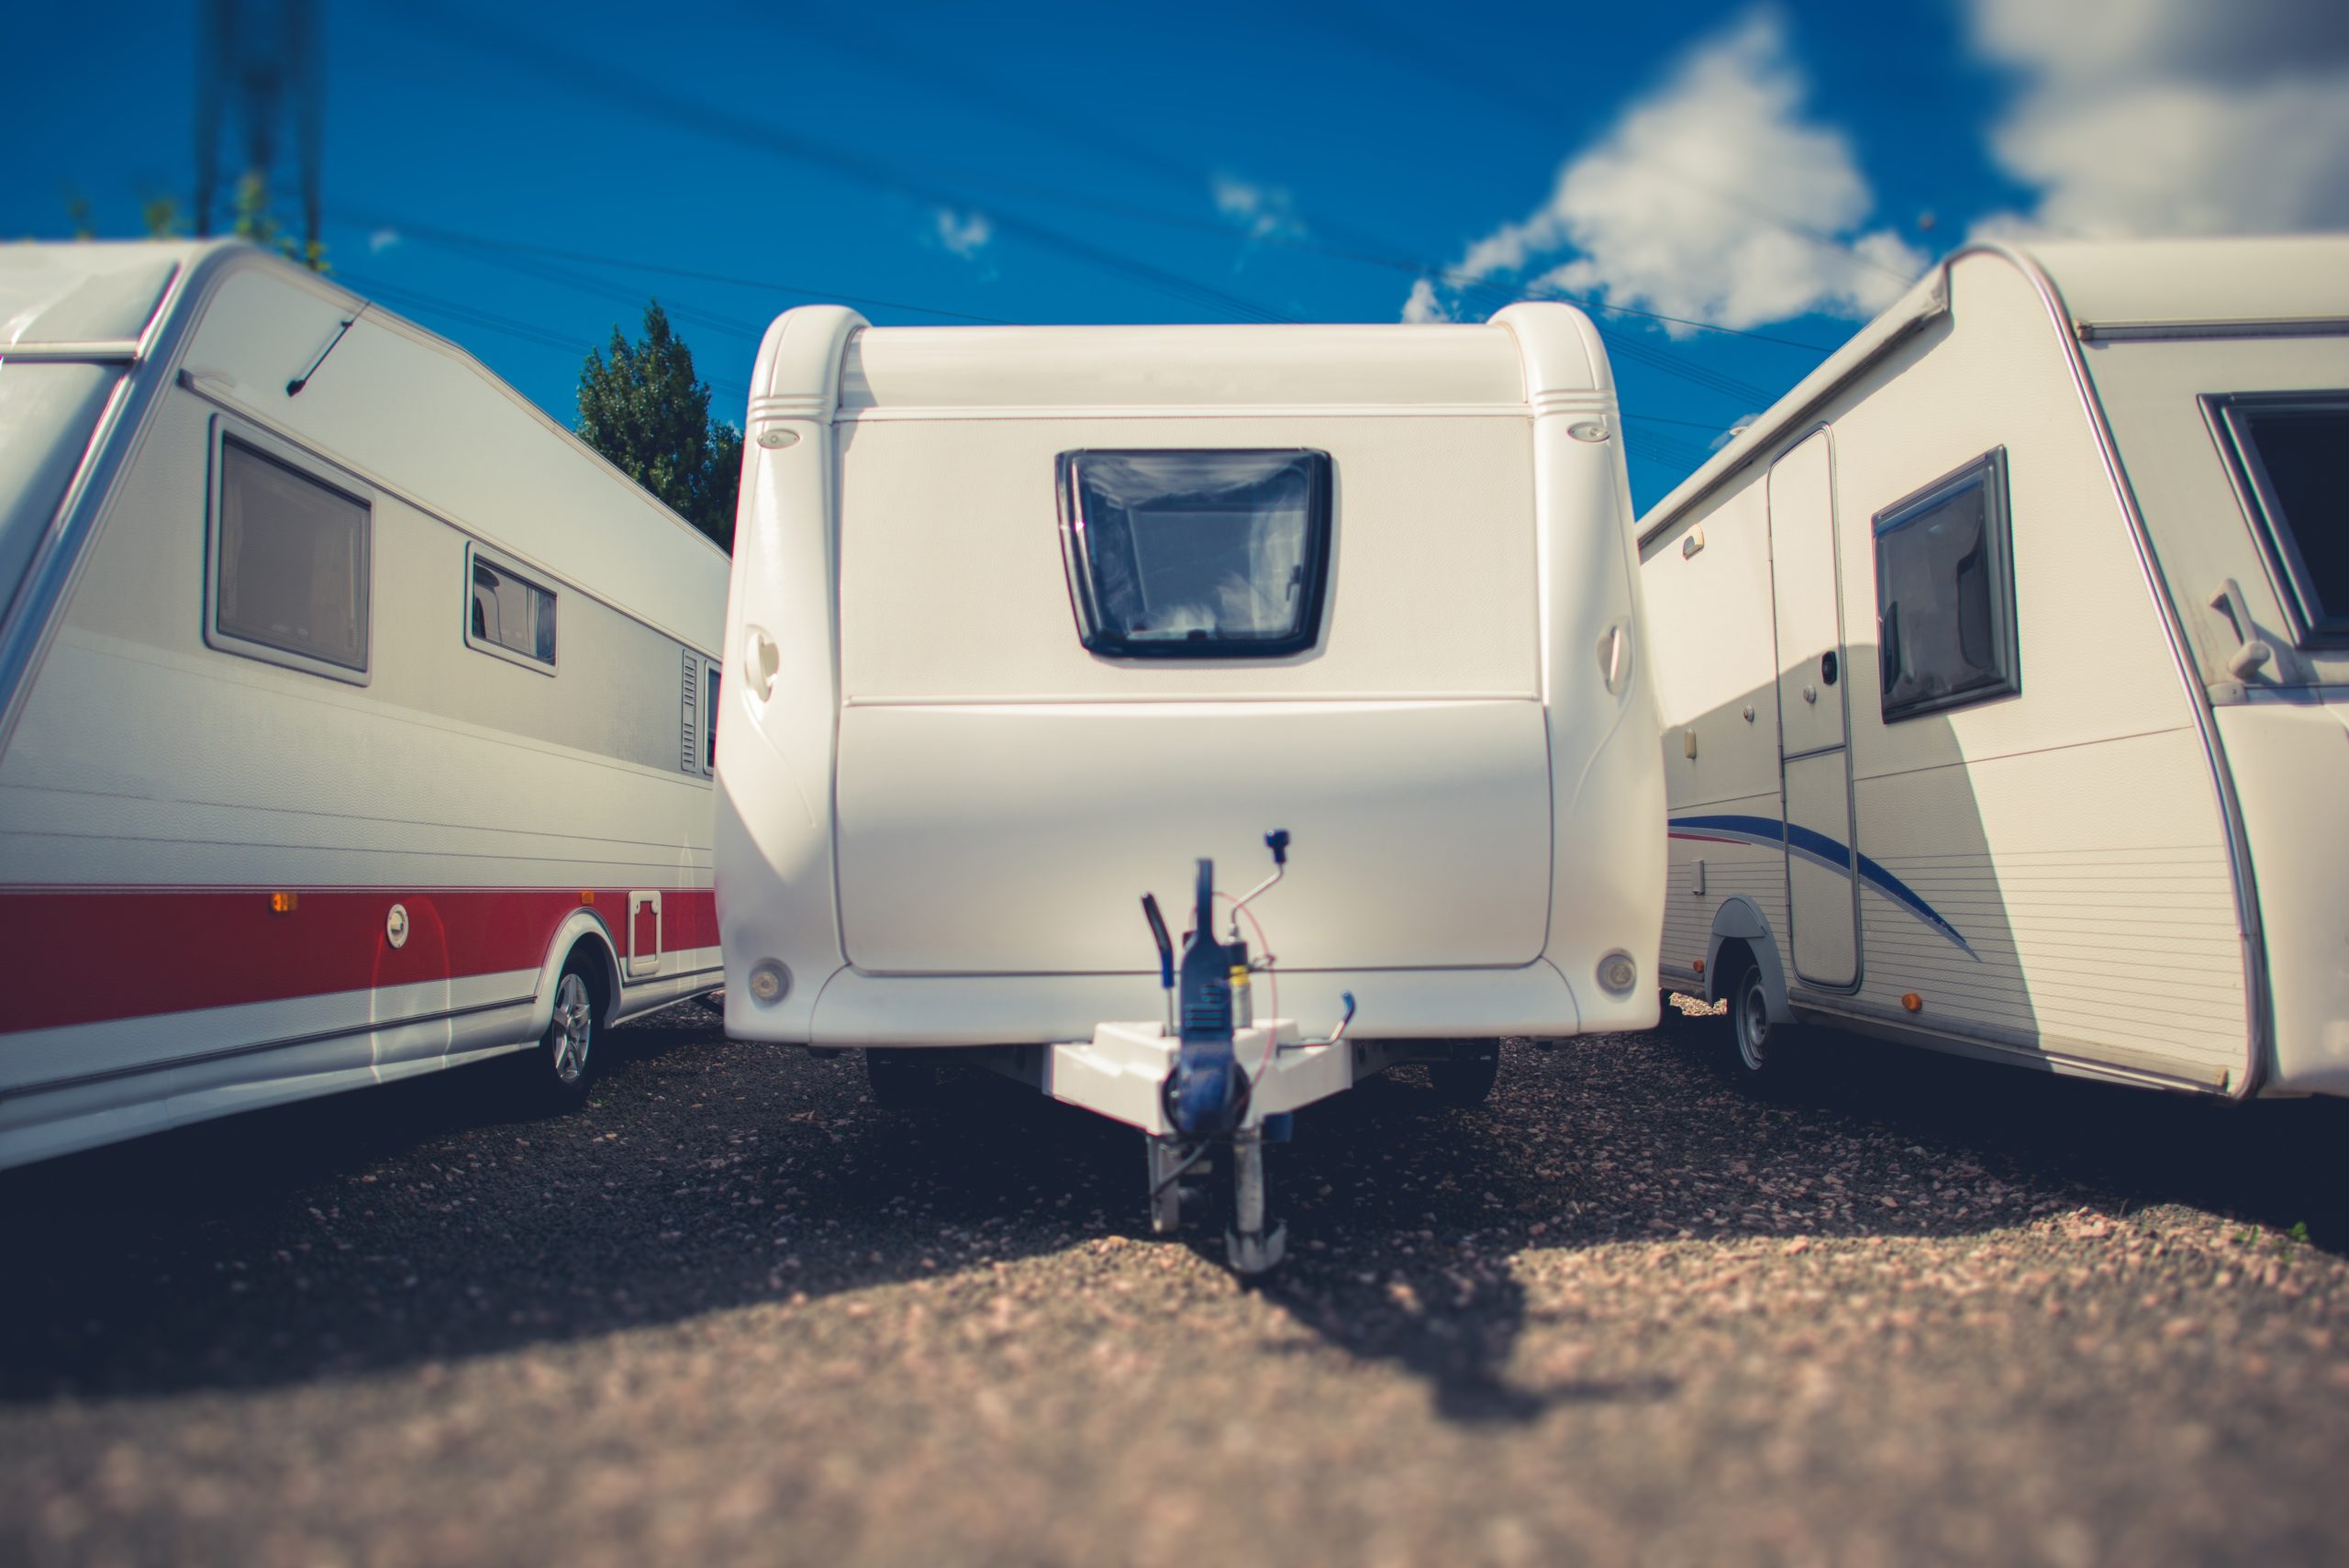 Pre Owned Travel Trailers For Sale. Campers and RVs Dealership Lot.